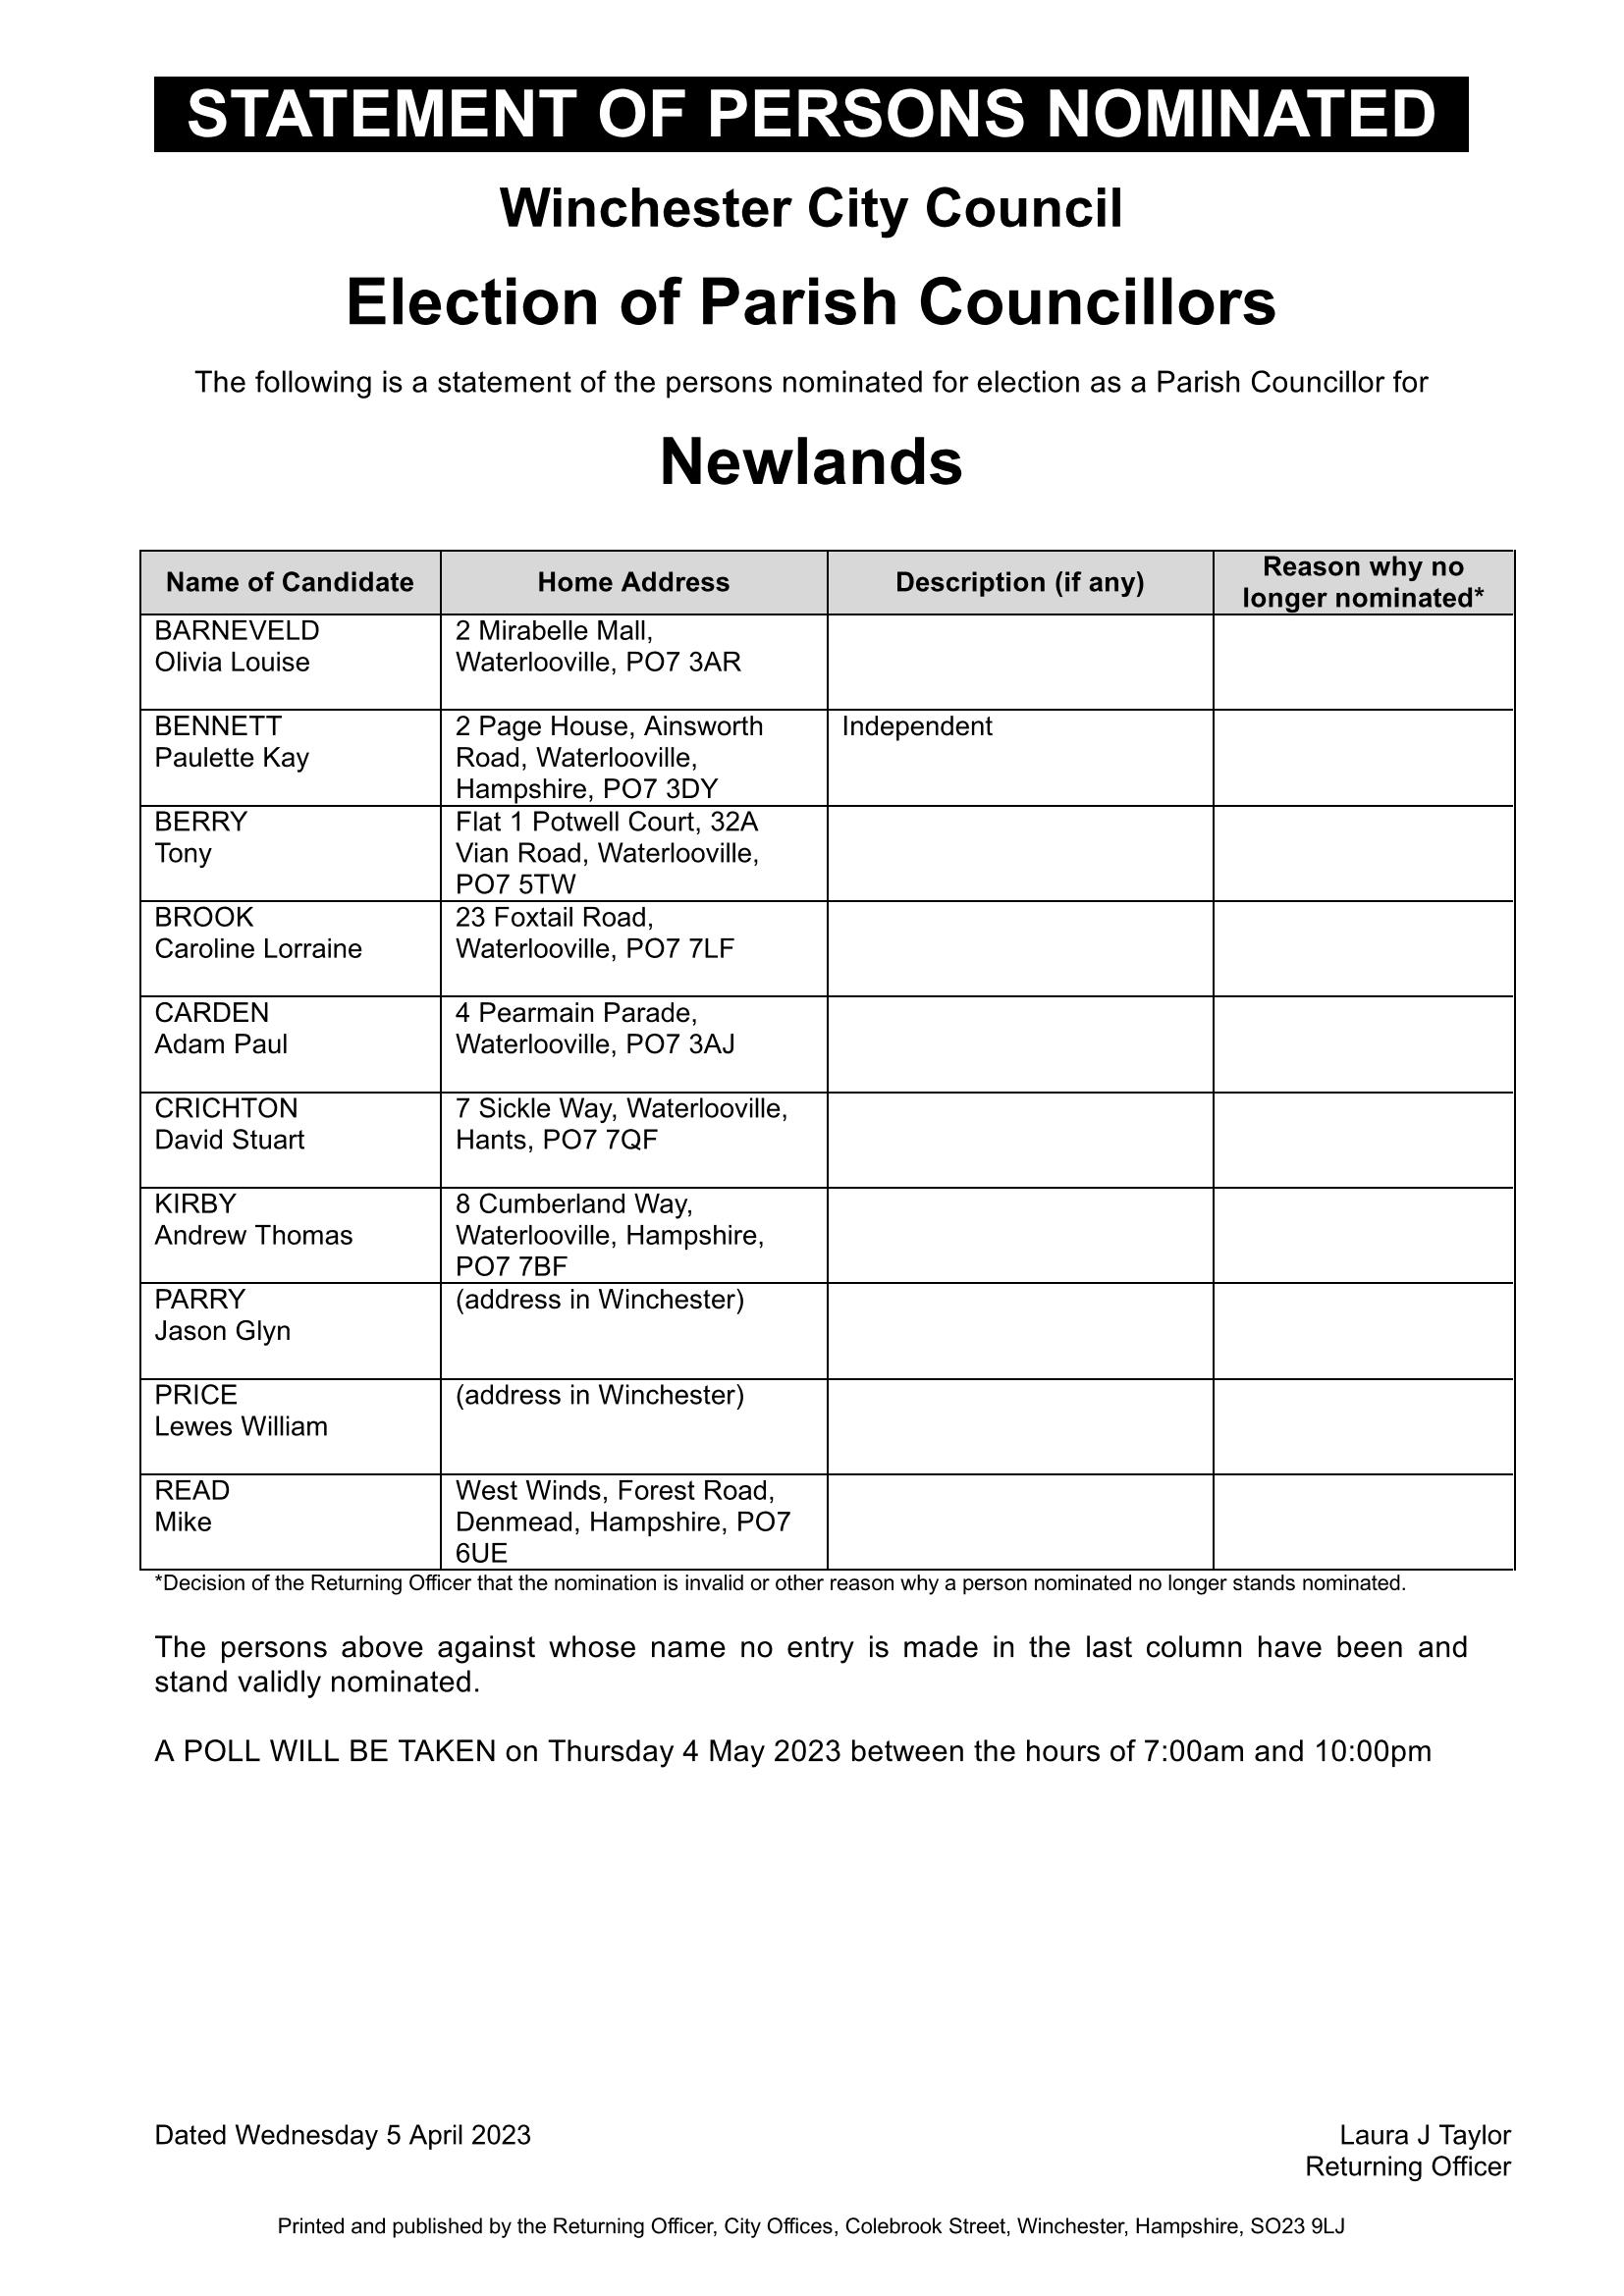 Newlands Parish Elections – Statement of persons nominated